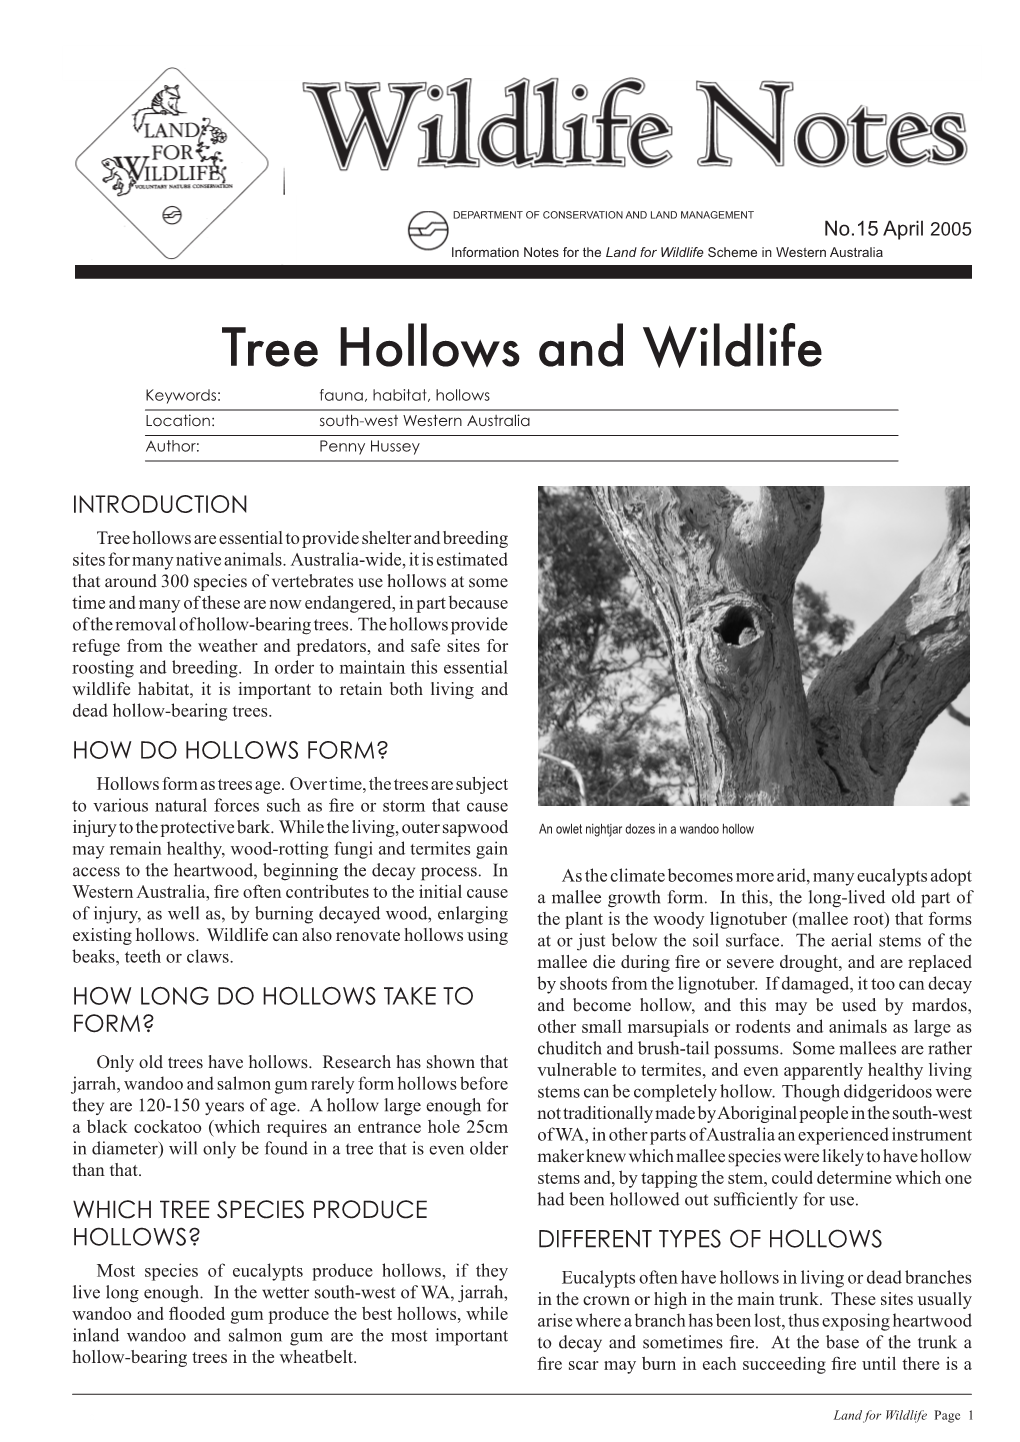 Tree Hollows and Wildlife 418.78 KB